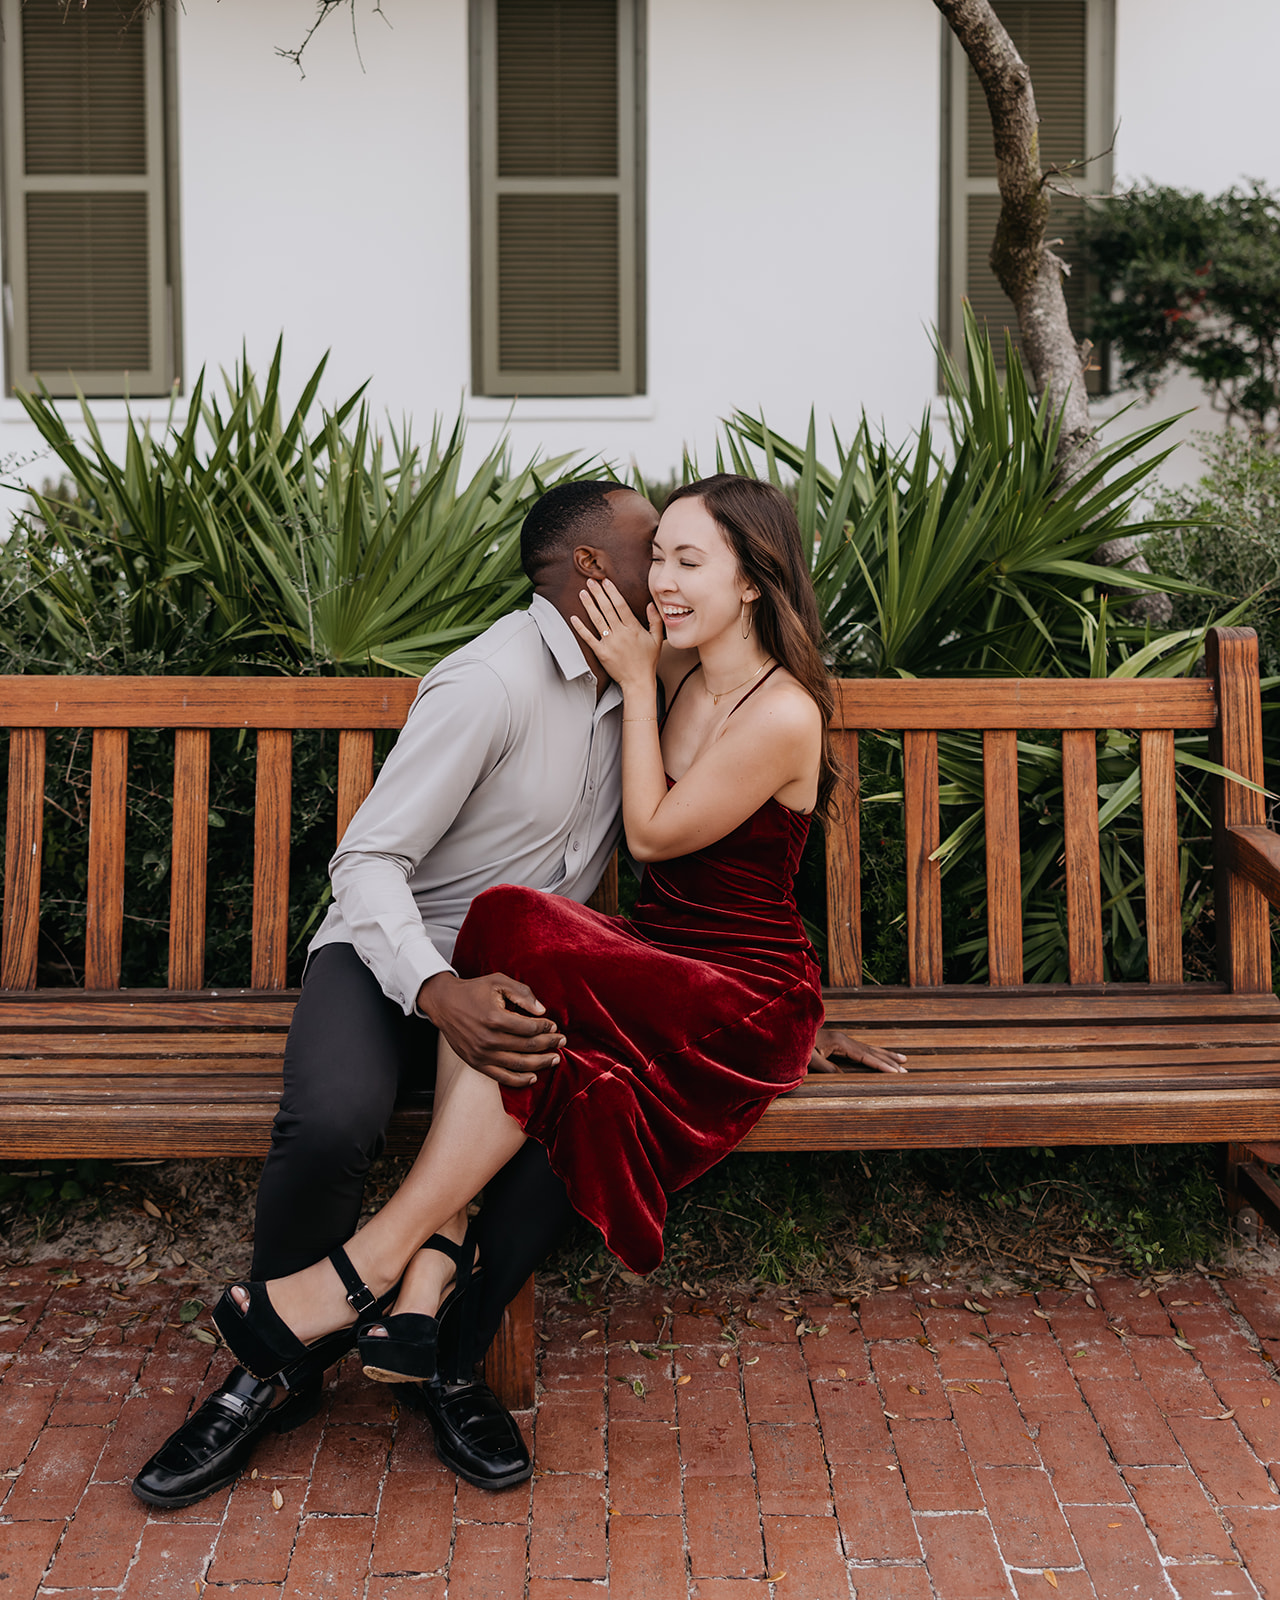 the groom whispers a secret to his bride while enjoying the Rosemary Beach town